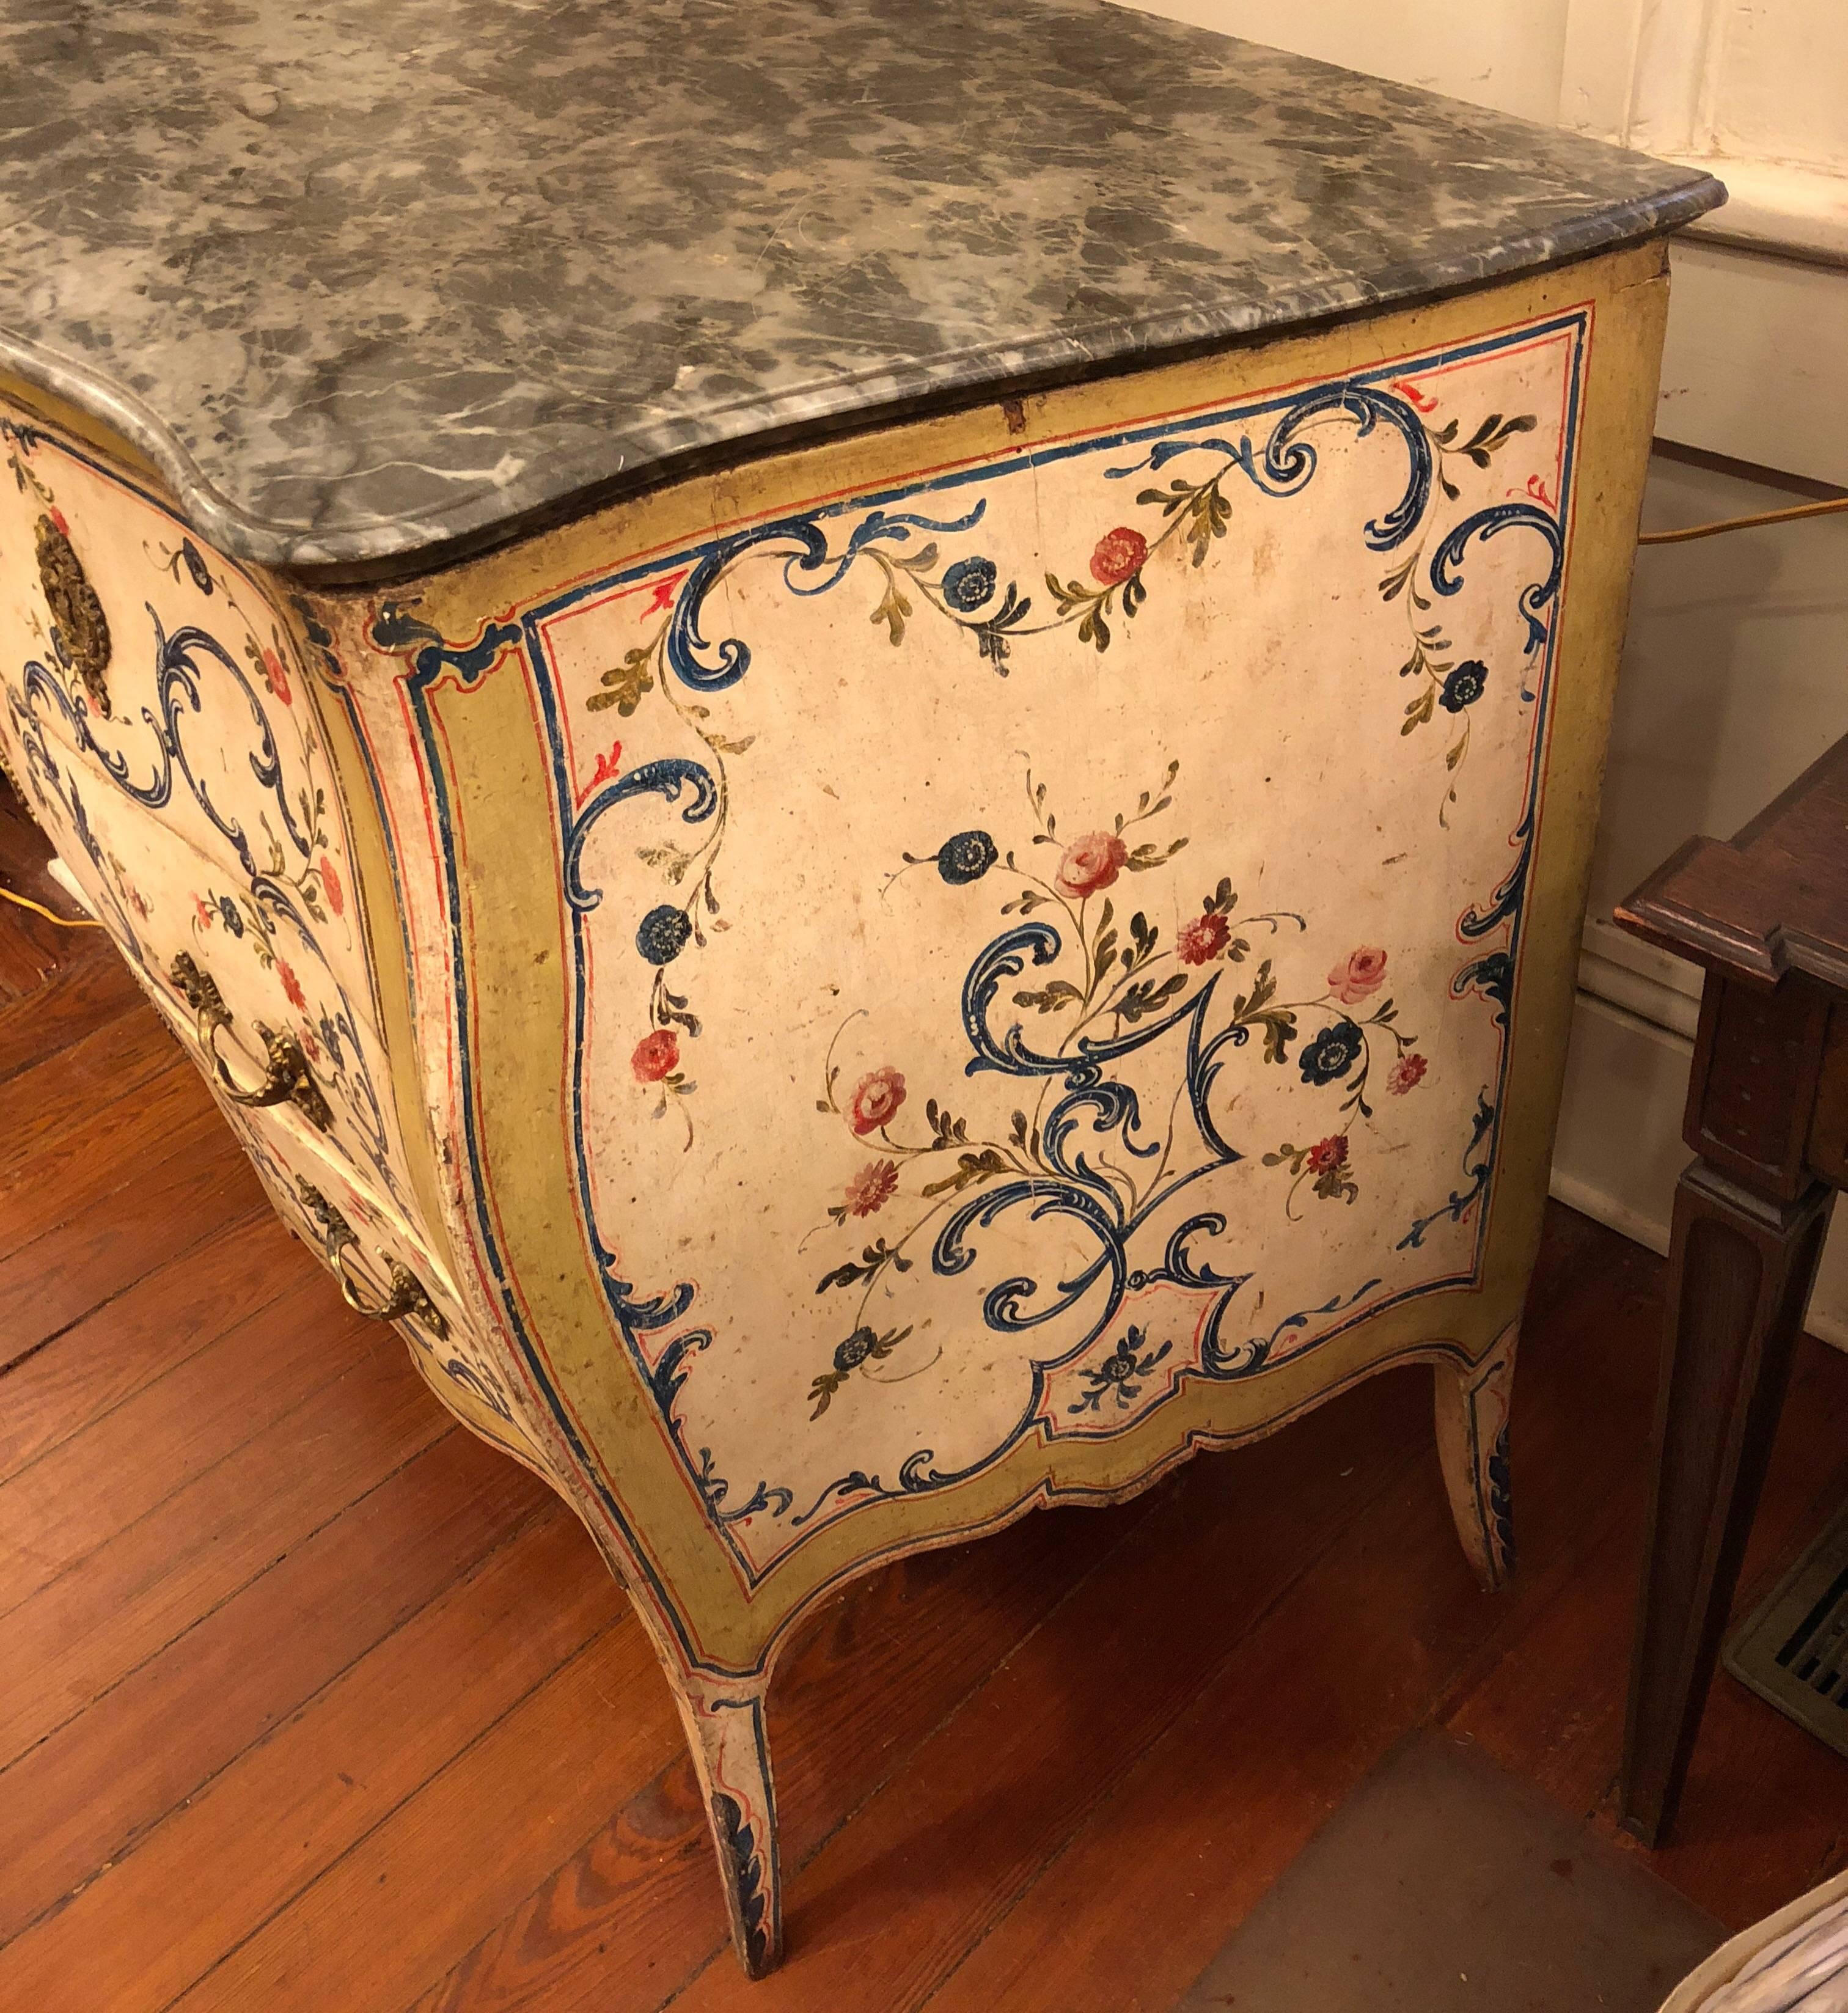 Exceptional painted Italian marble topped commode from Genoa, Italy. The paint is all original and the hardware appears to be original as well. Some of the gilt on hardware is worn significantly. Paint has remarkably little wear. This commode came